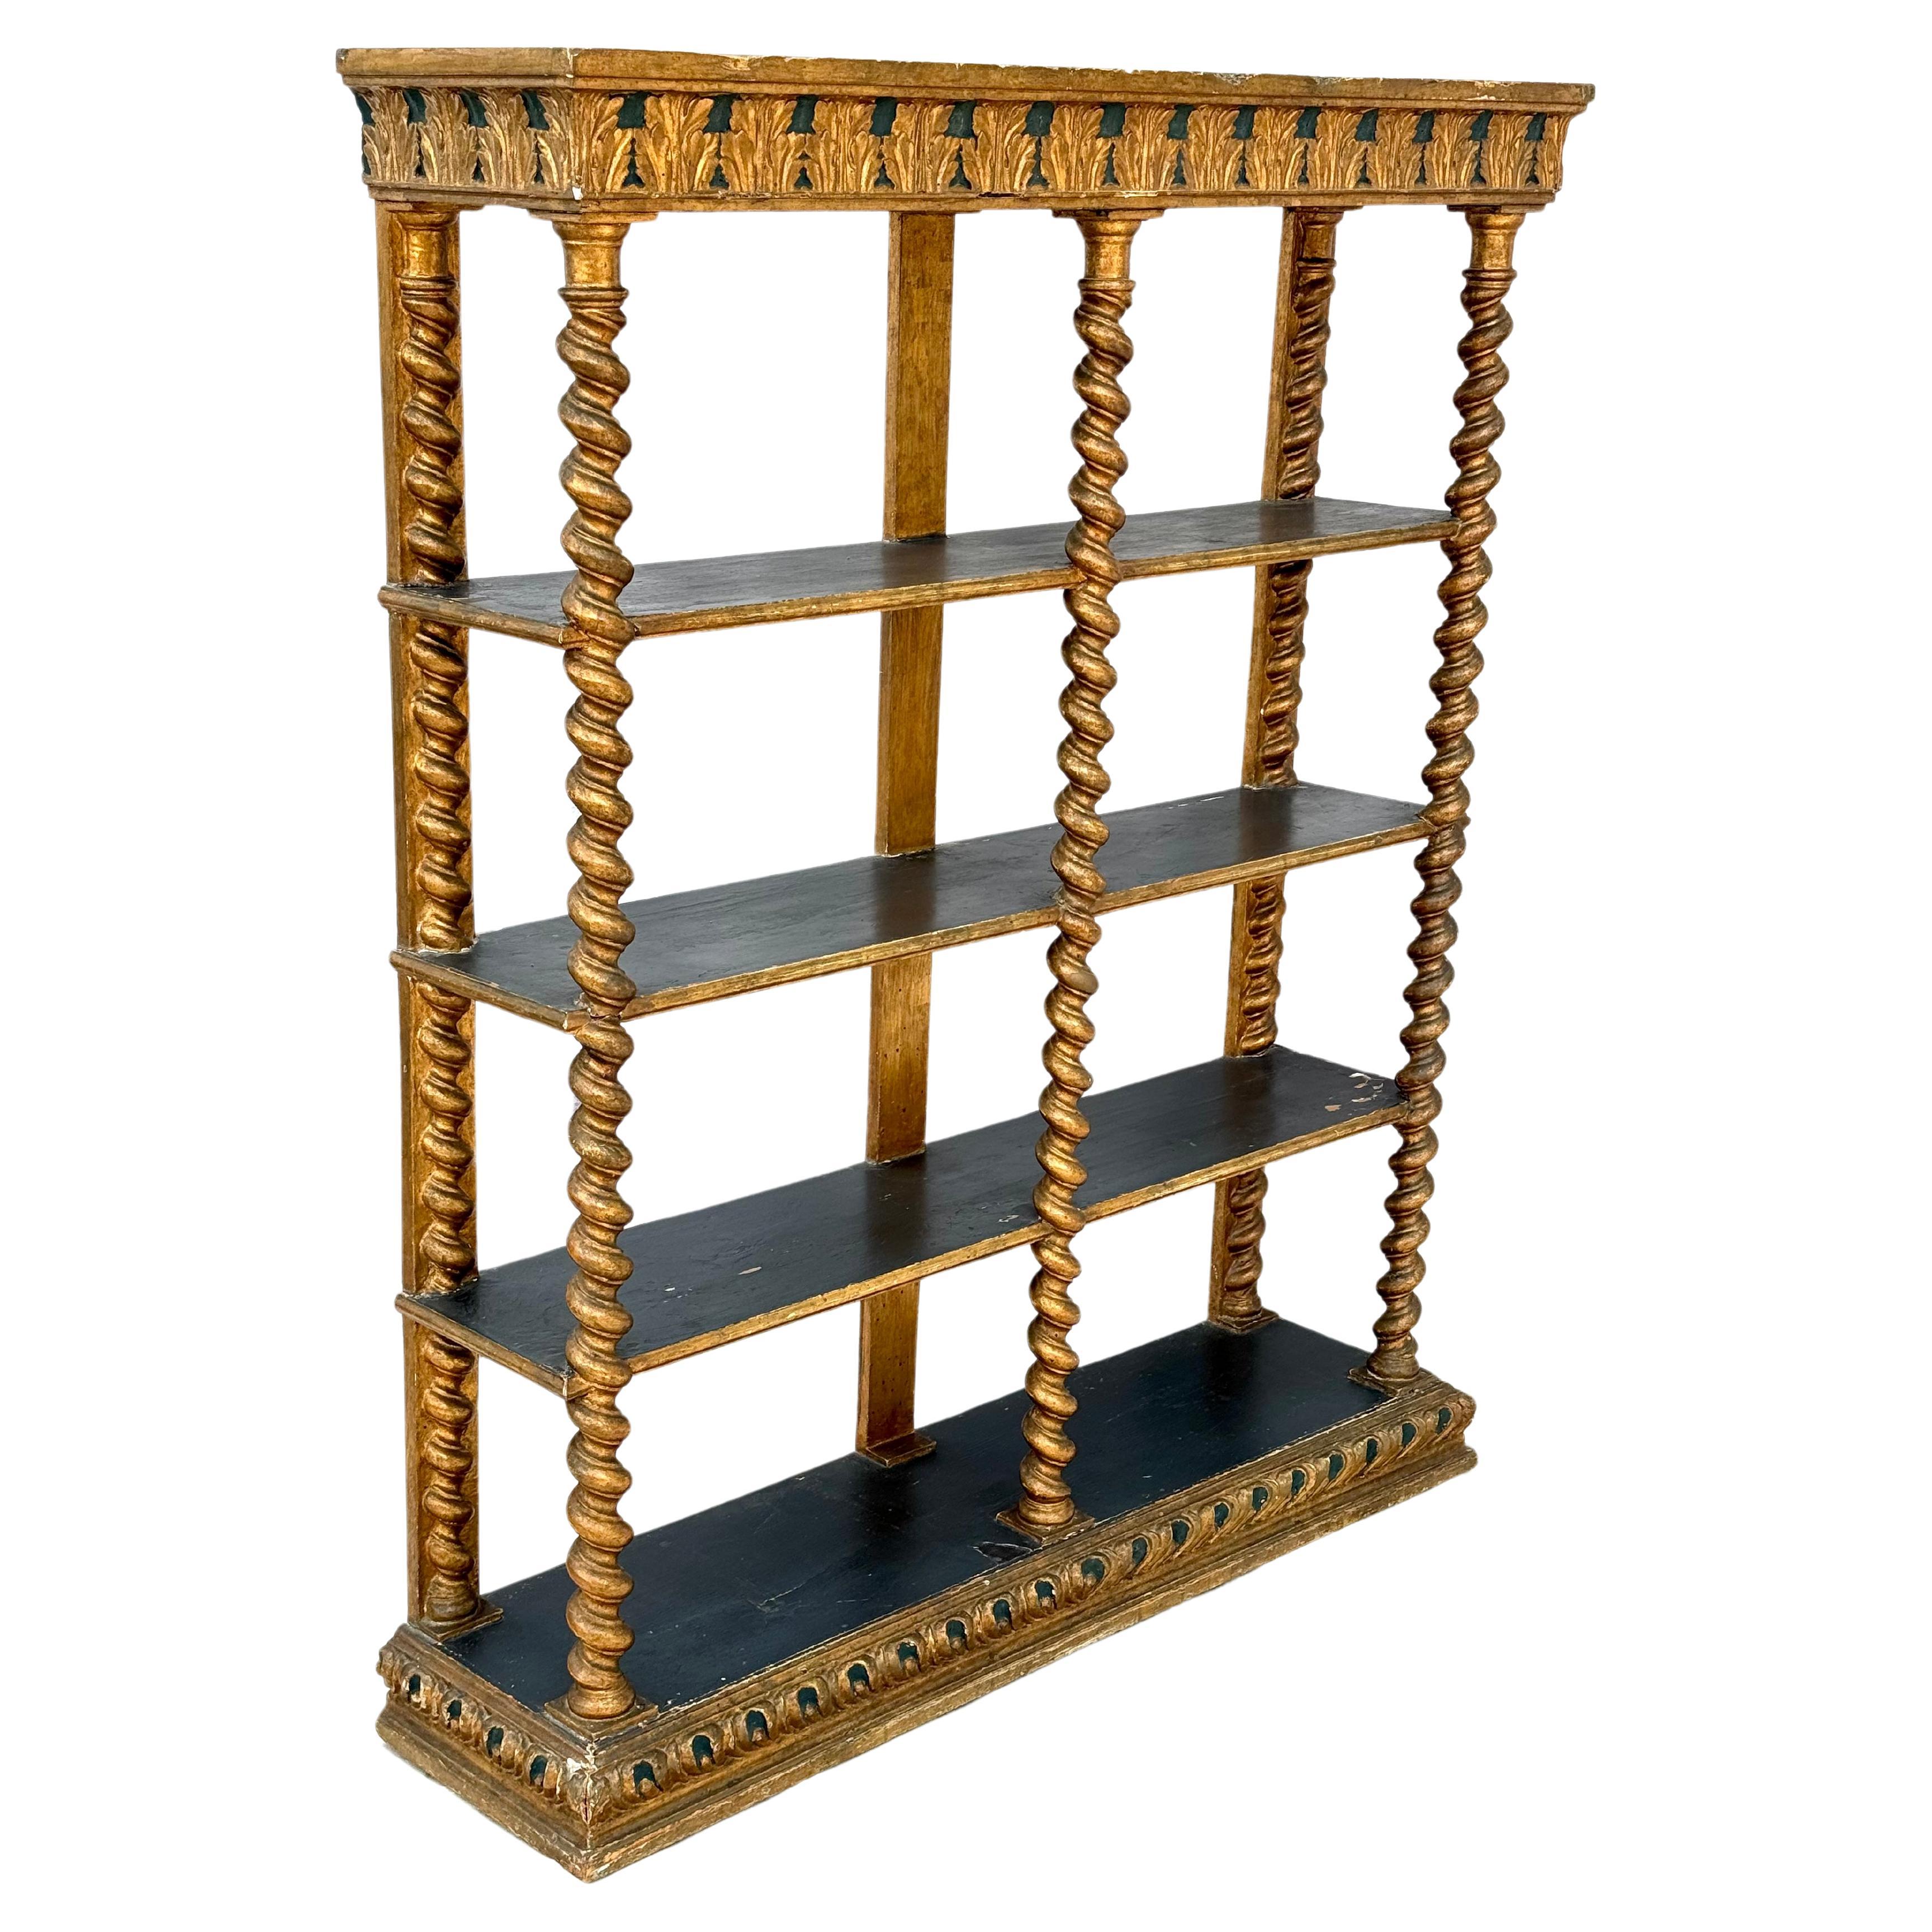 Italian Renaissance giltwood open bookcase, 19th century with antique elements, the gilt and polychrome top with carved acanthus reserves above the three fixed shelves, conjoined by the carved supports terminating at the shaped and molded base. The